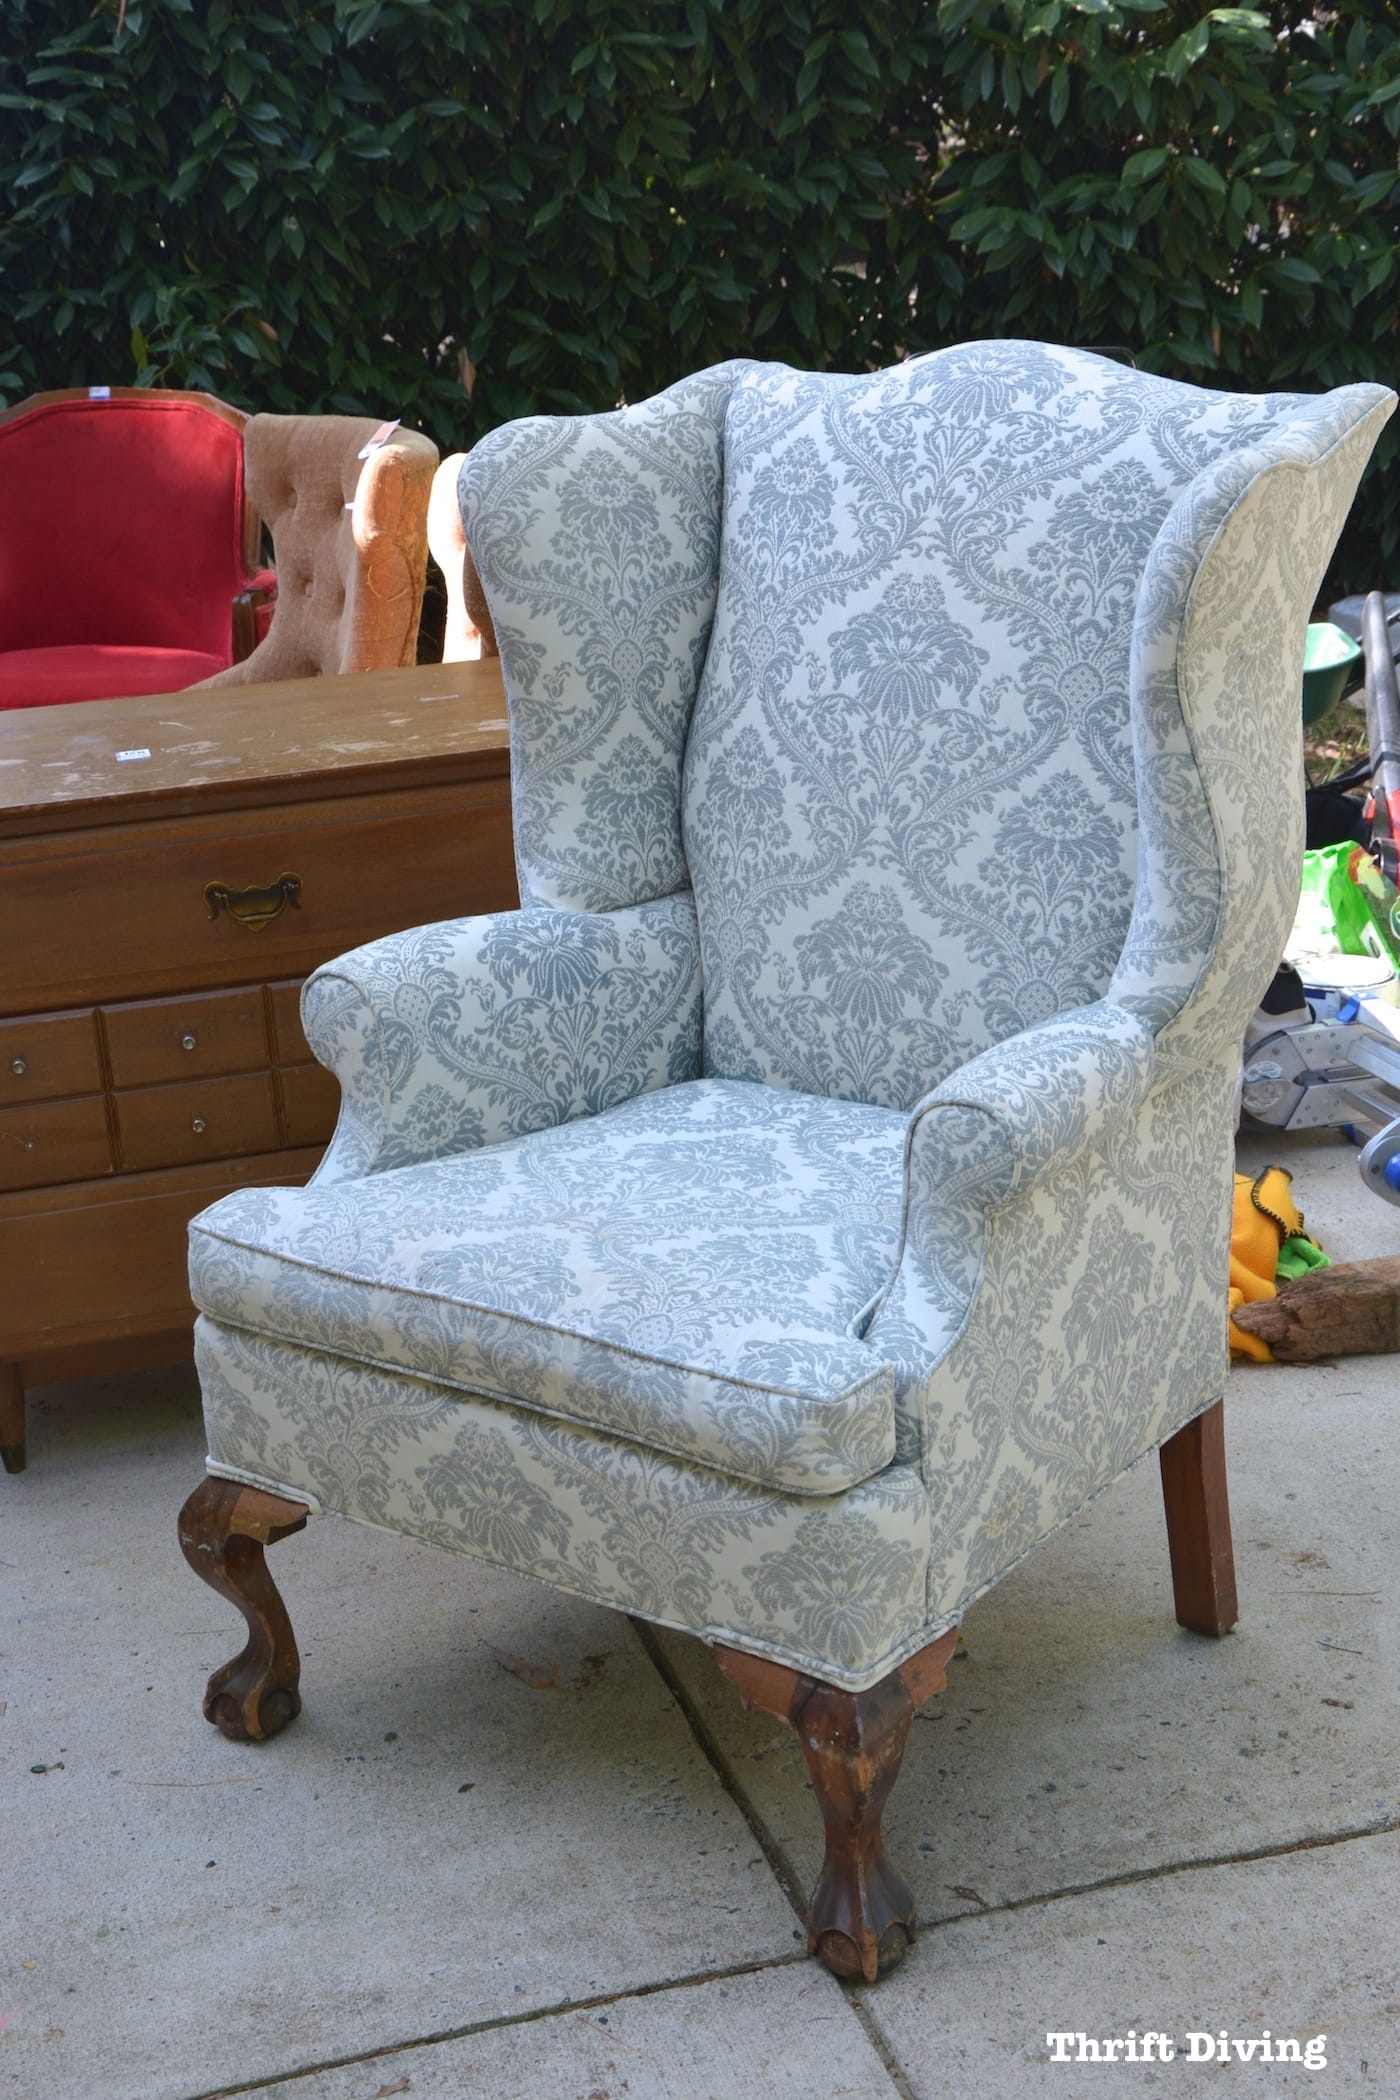 How To Reupholster A Wingback Chair, How To Reupholster A Chair For Beginners